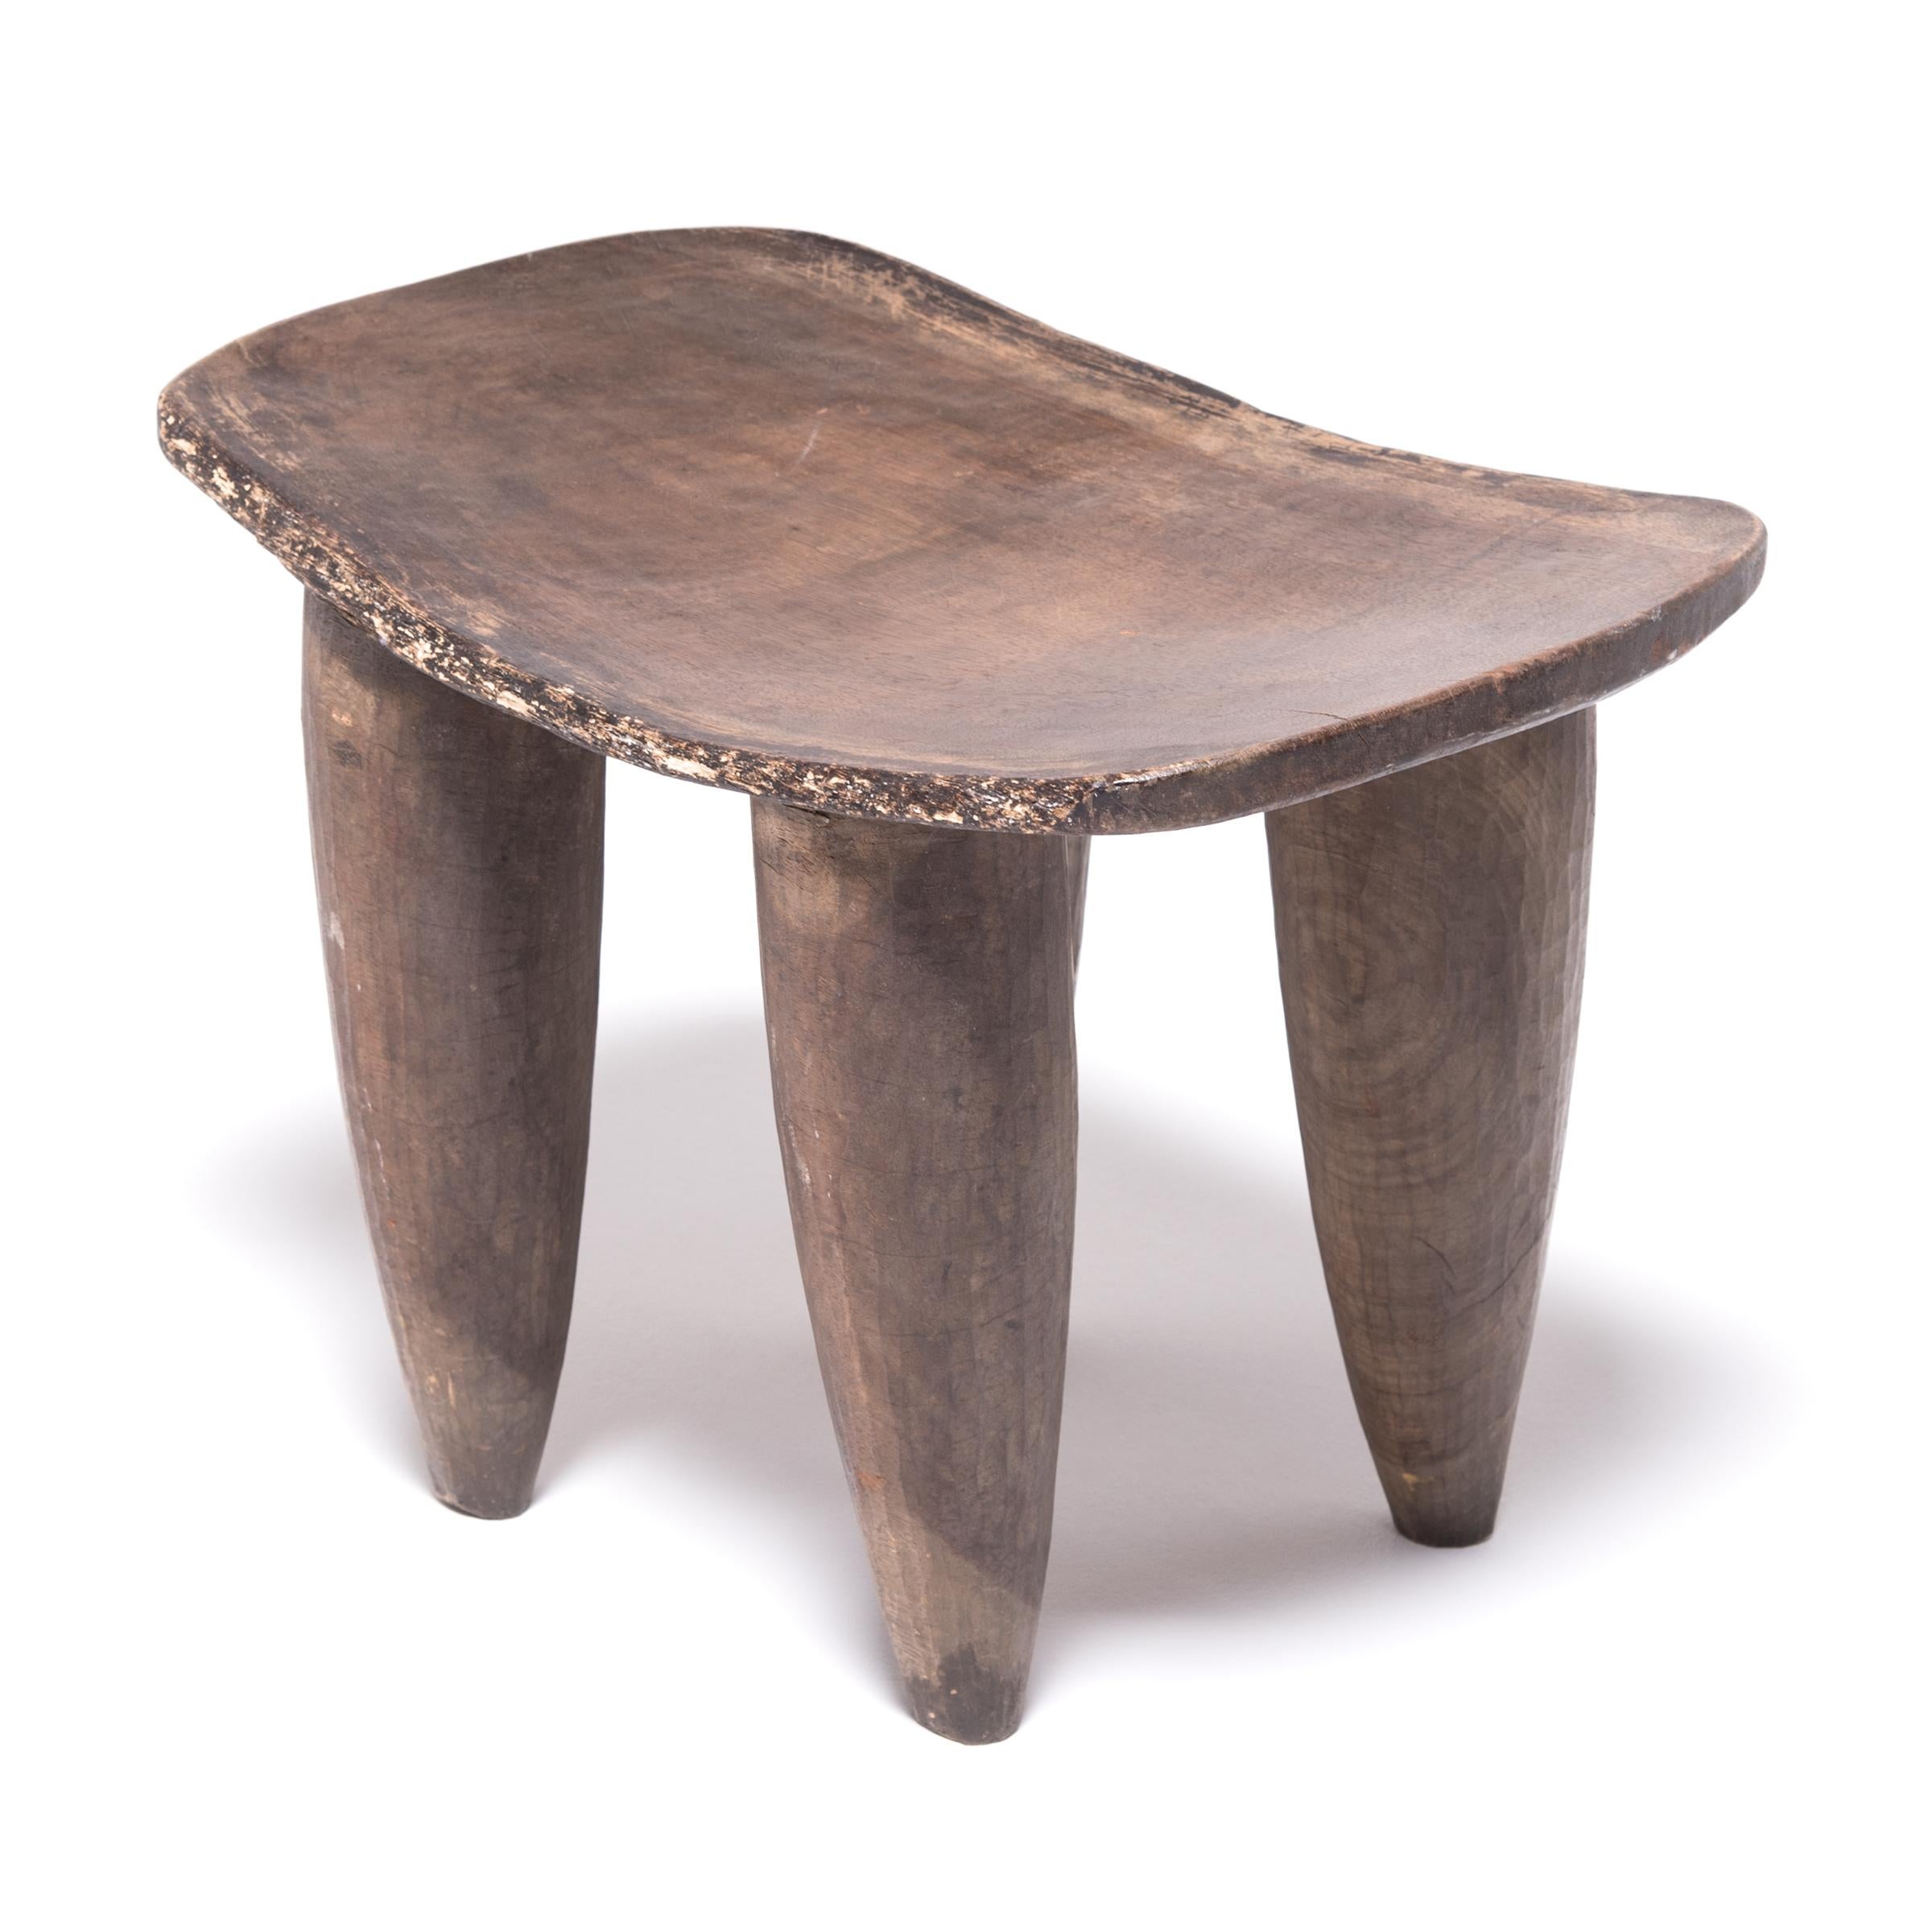 Hand-carved from a single, solid block of wood, each Senufo stool communicates a unique personality as a sculptural seat or table. The irregular carved strokes, slightly lifted seat and expressive legs are telltale identifiers. This traditional